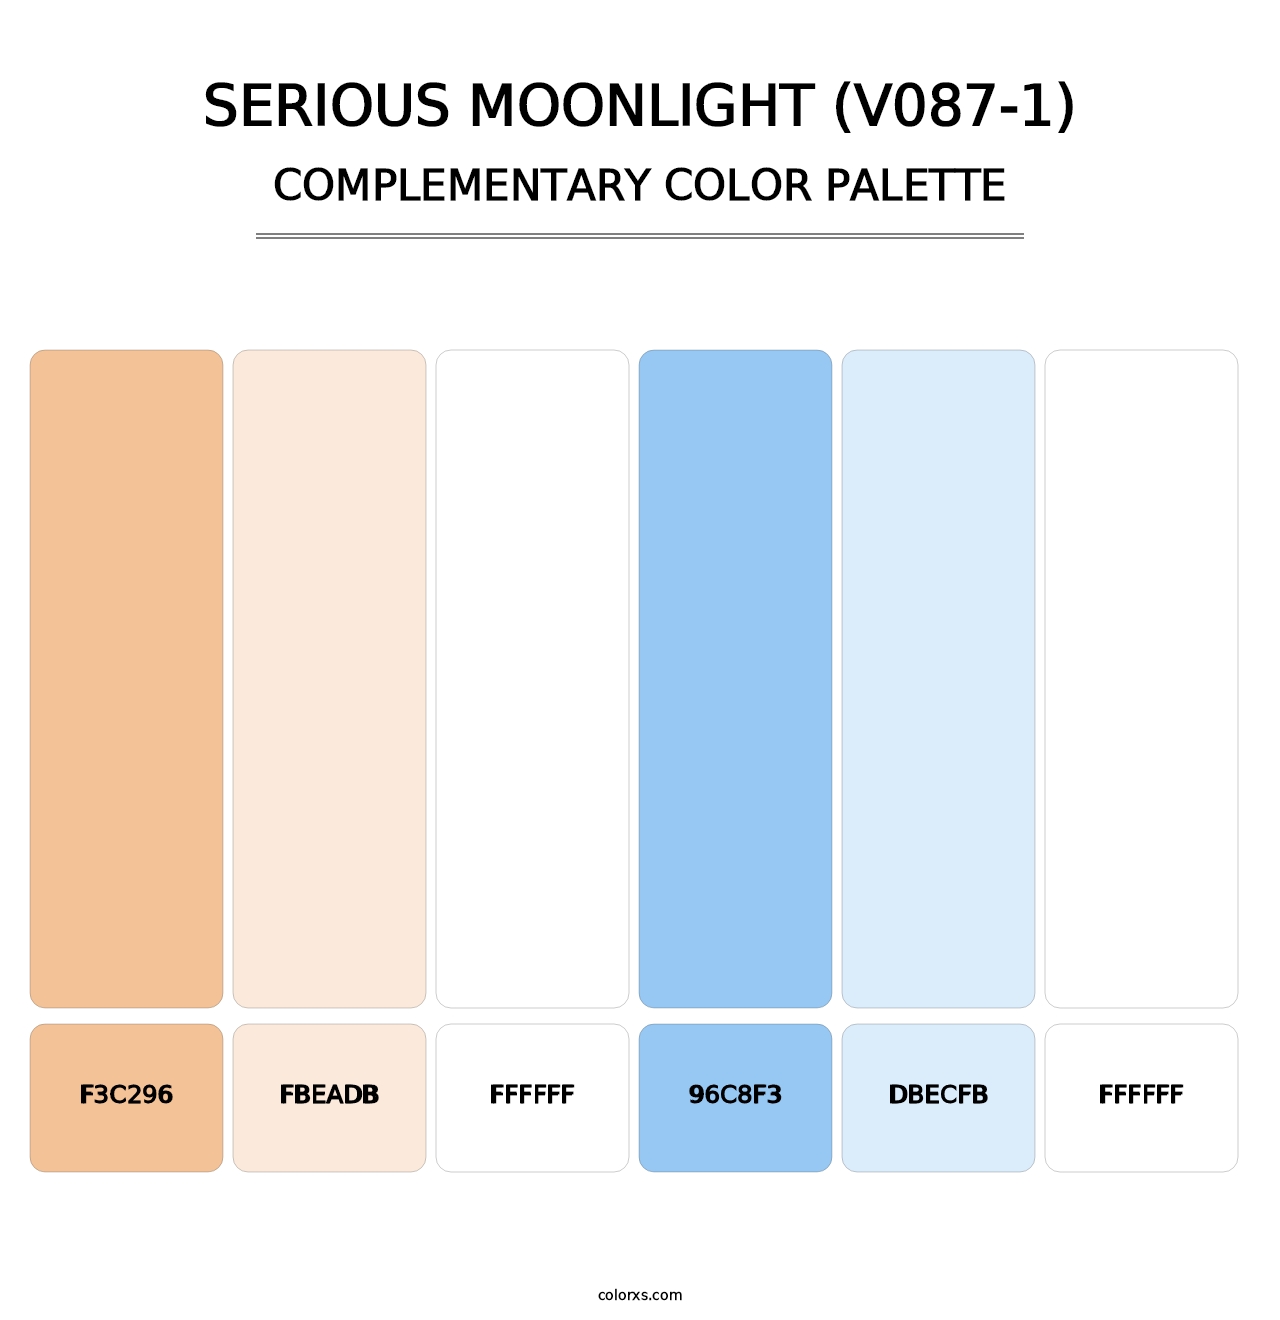 Serious Moonlight (V087-1) - Complementary Color Palette